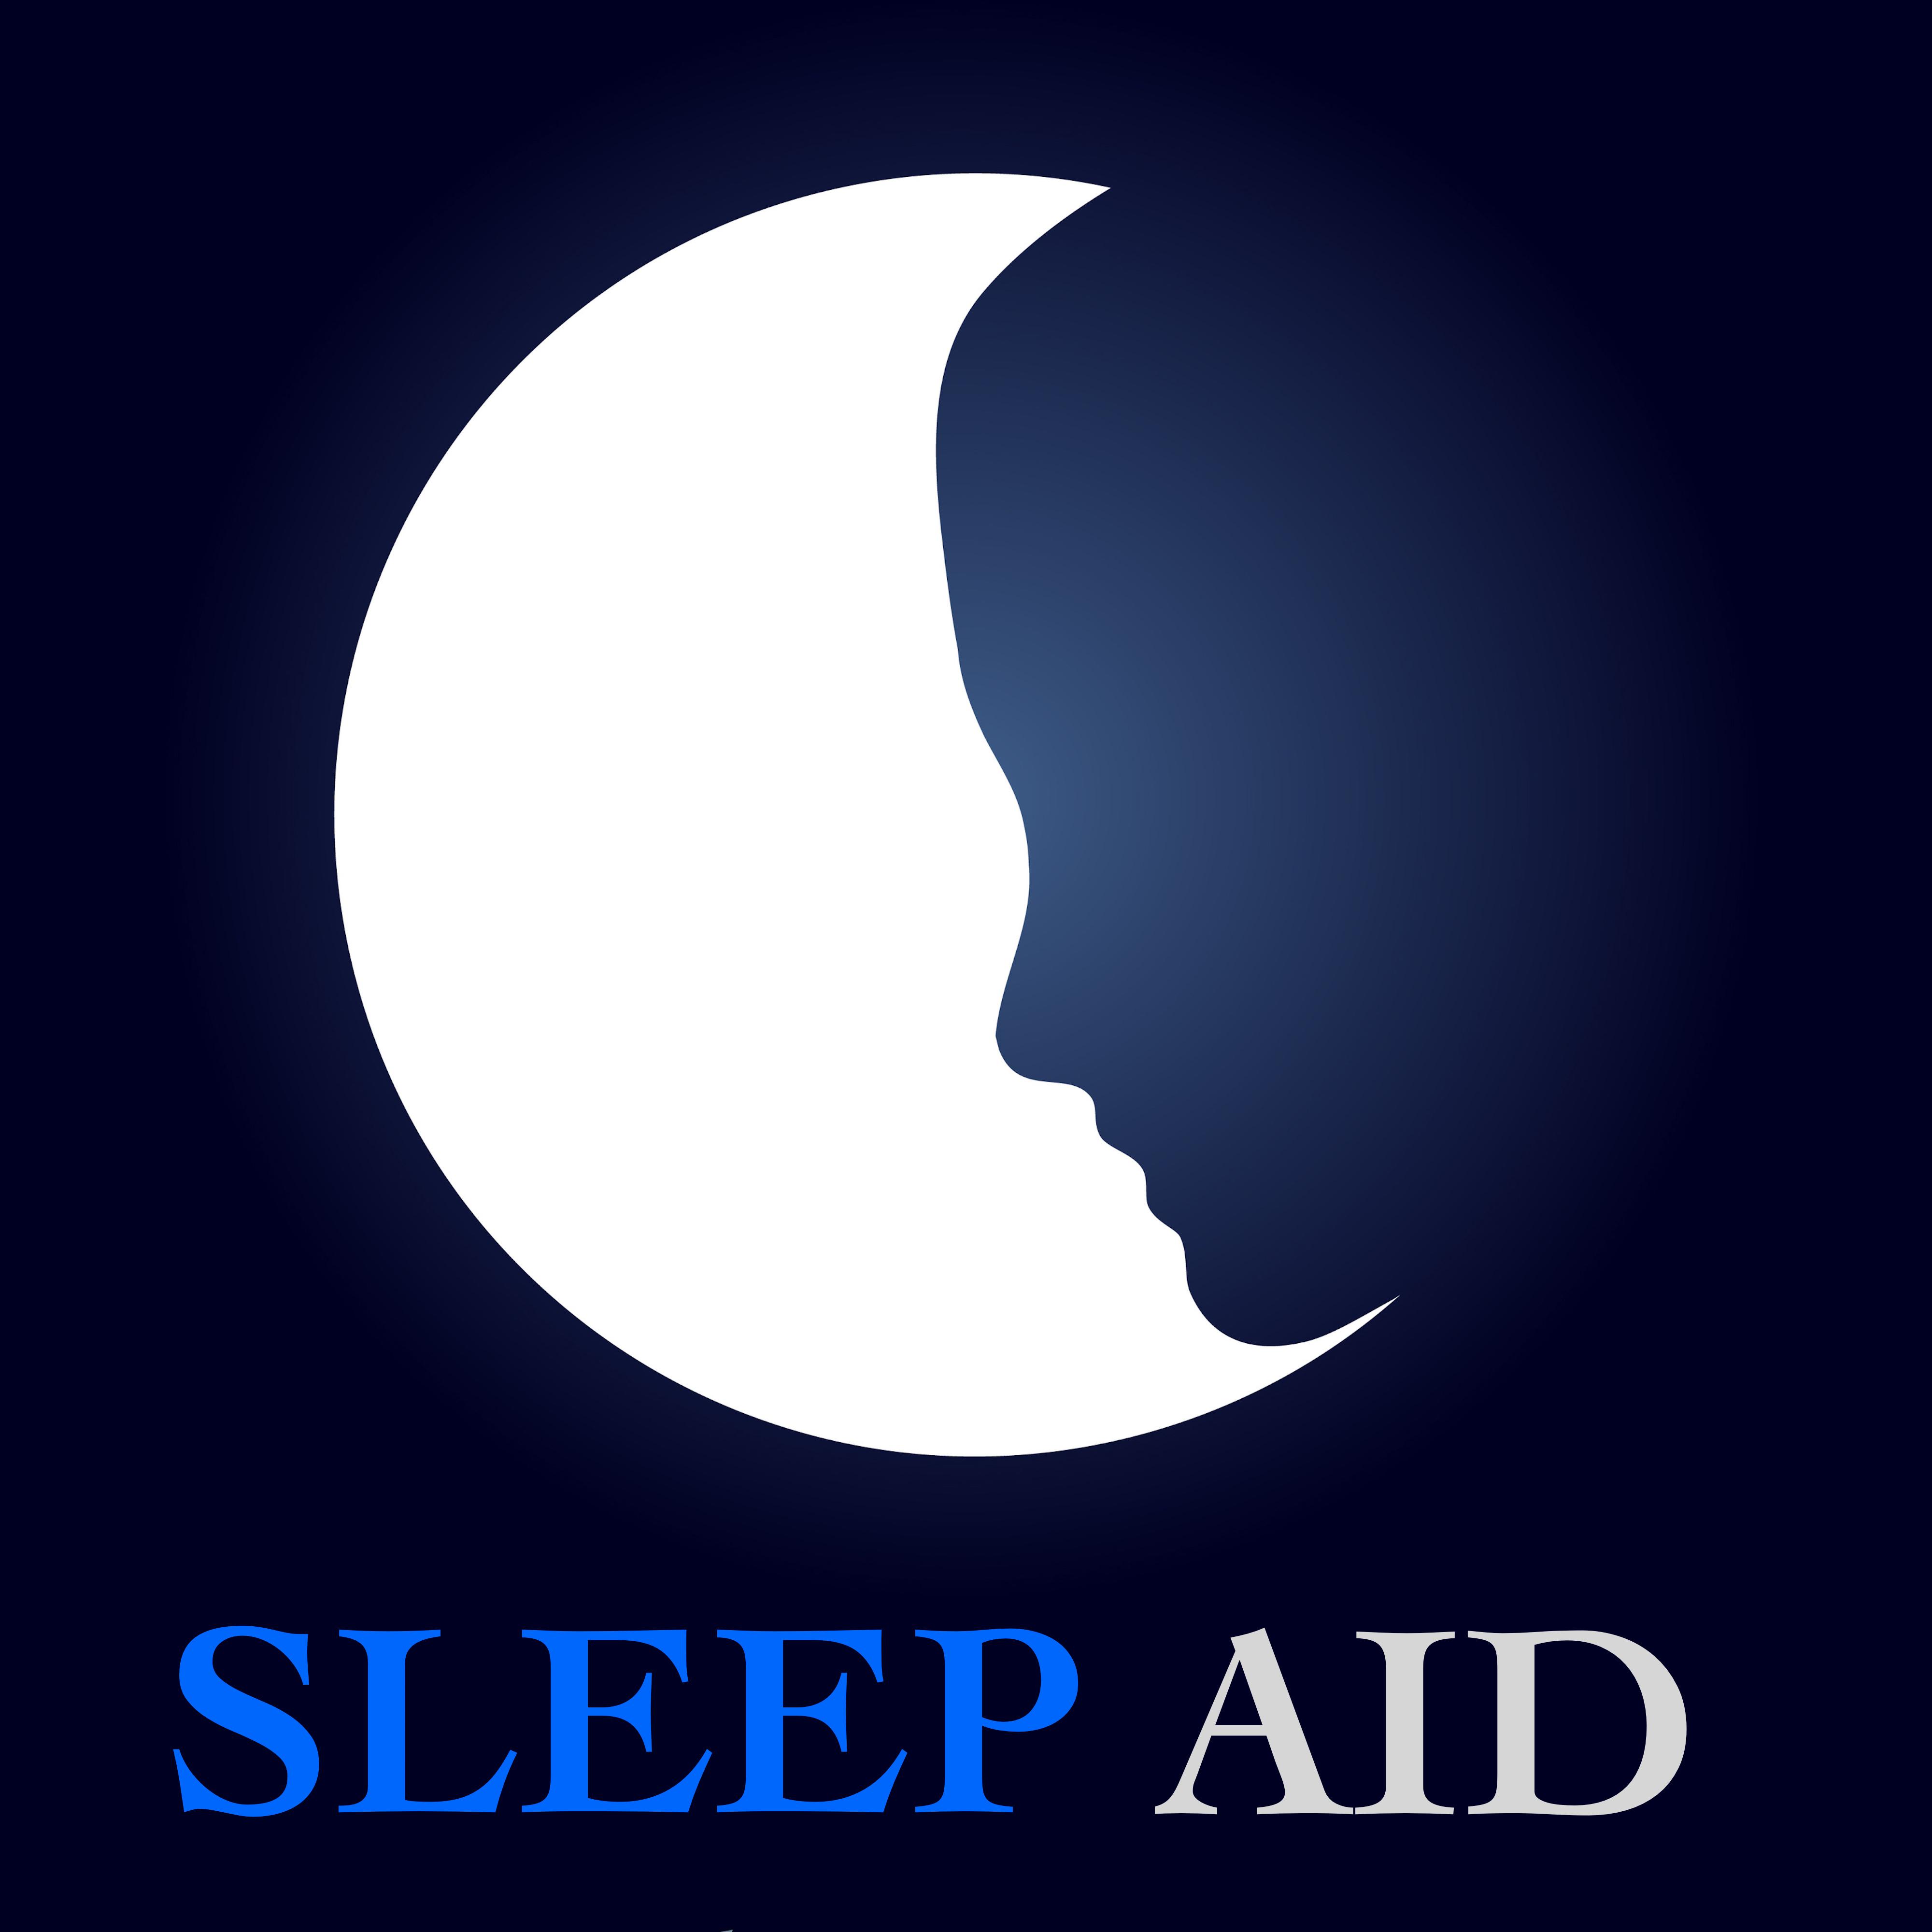 Sleep Aid – Piano Music, Flute Music & Sounds of Nature for Sleepwell and Relaxing Mind